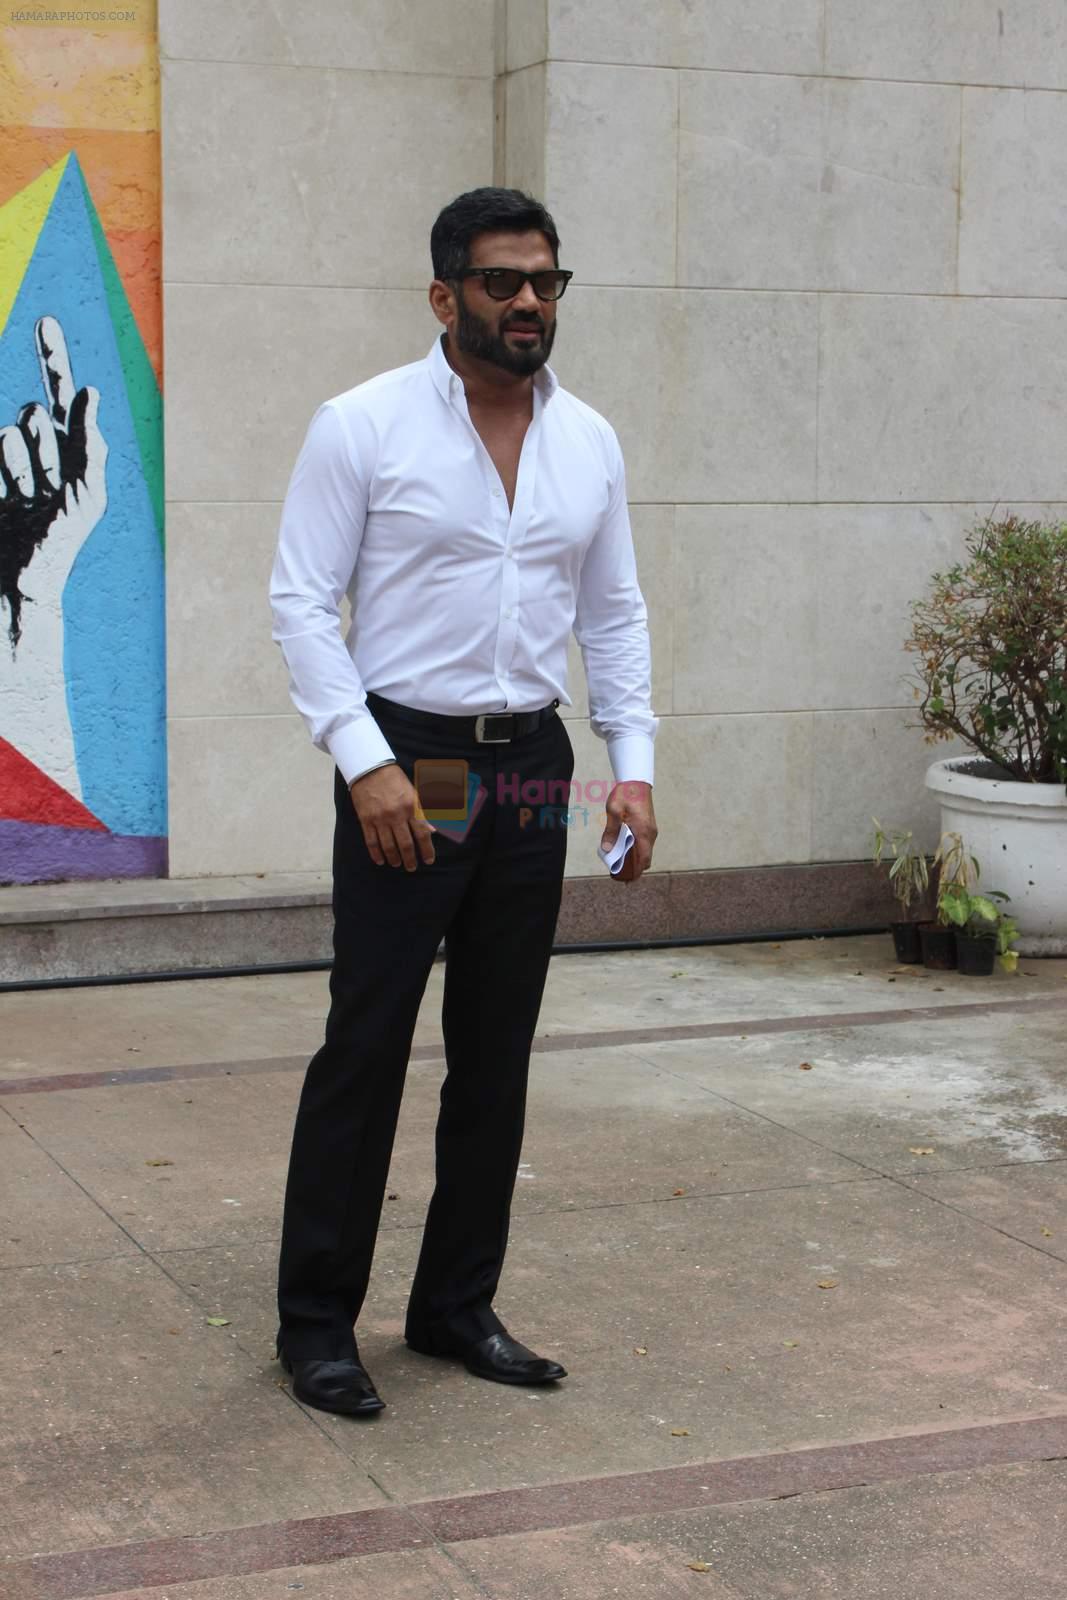 Sunil Shetty at streetsmart street safe campaign launch by top gear magazine and mumbai police on  30th June 2015